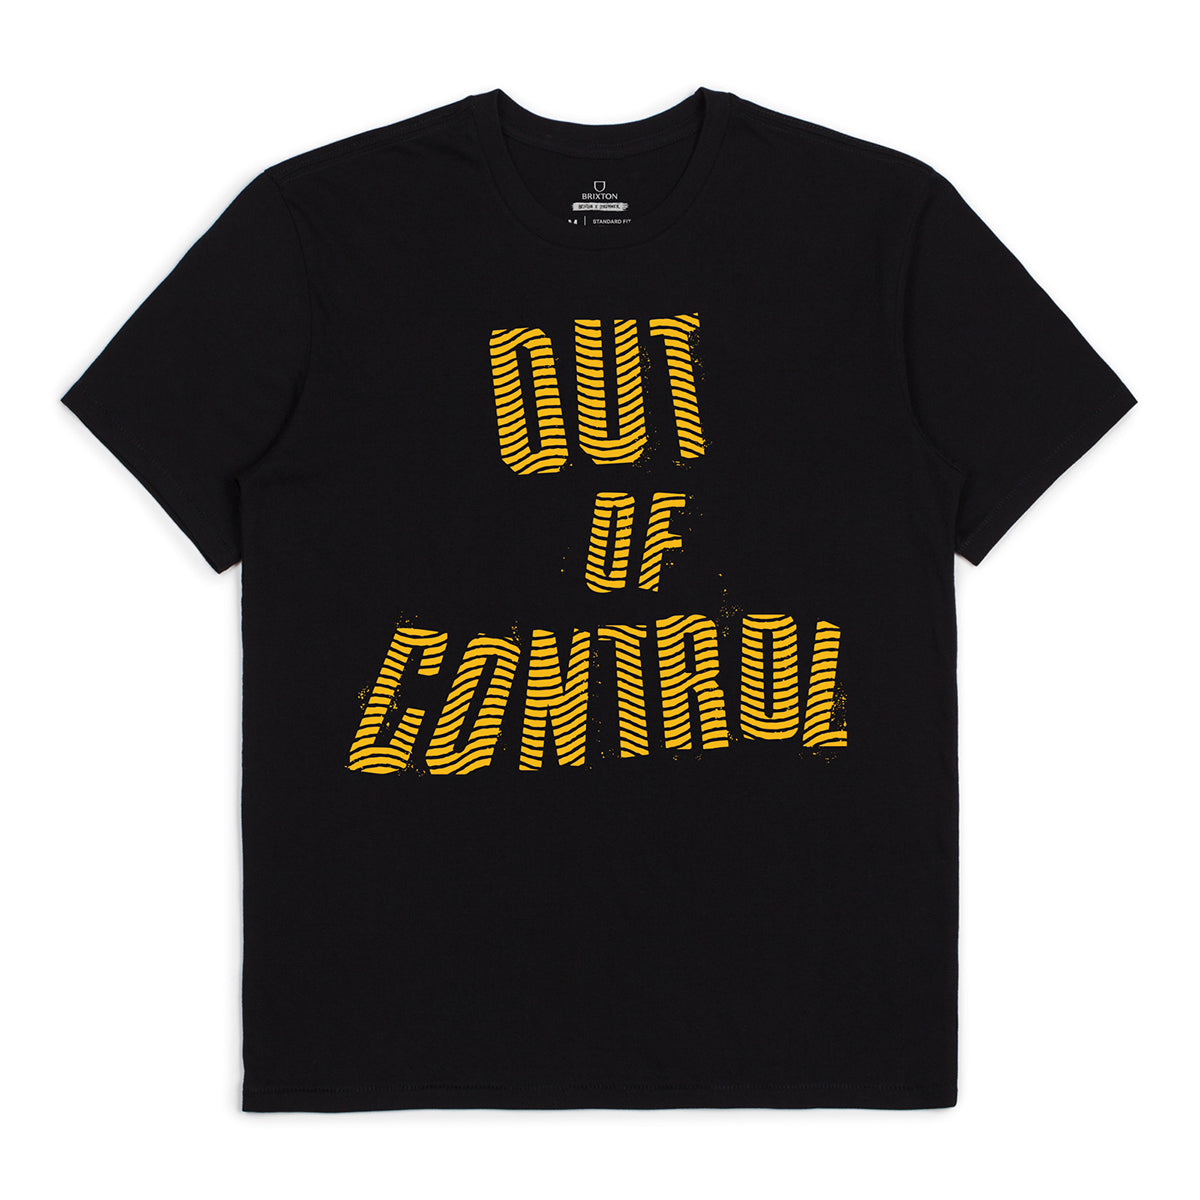 OUT OF CONTROL S/S STT